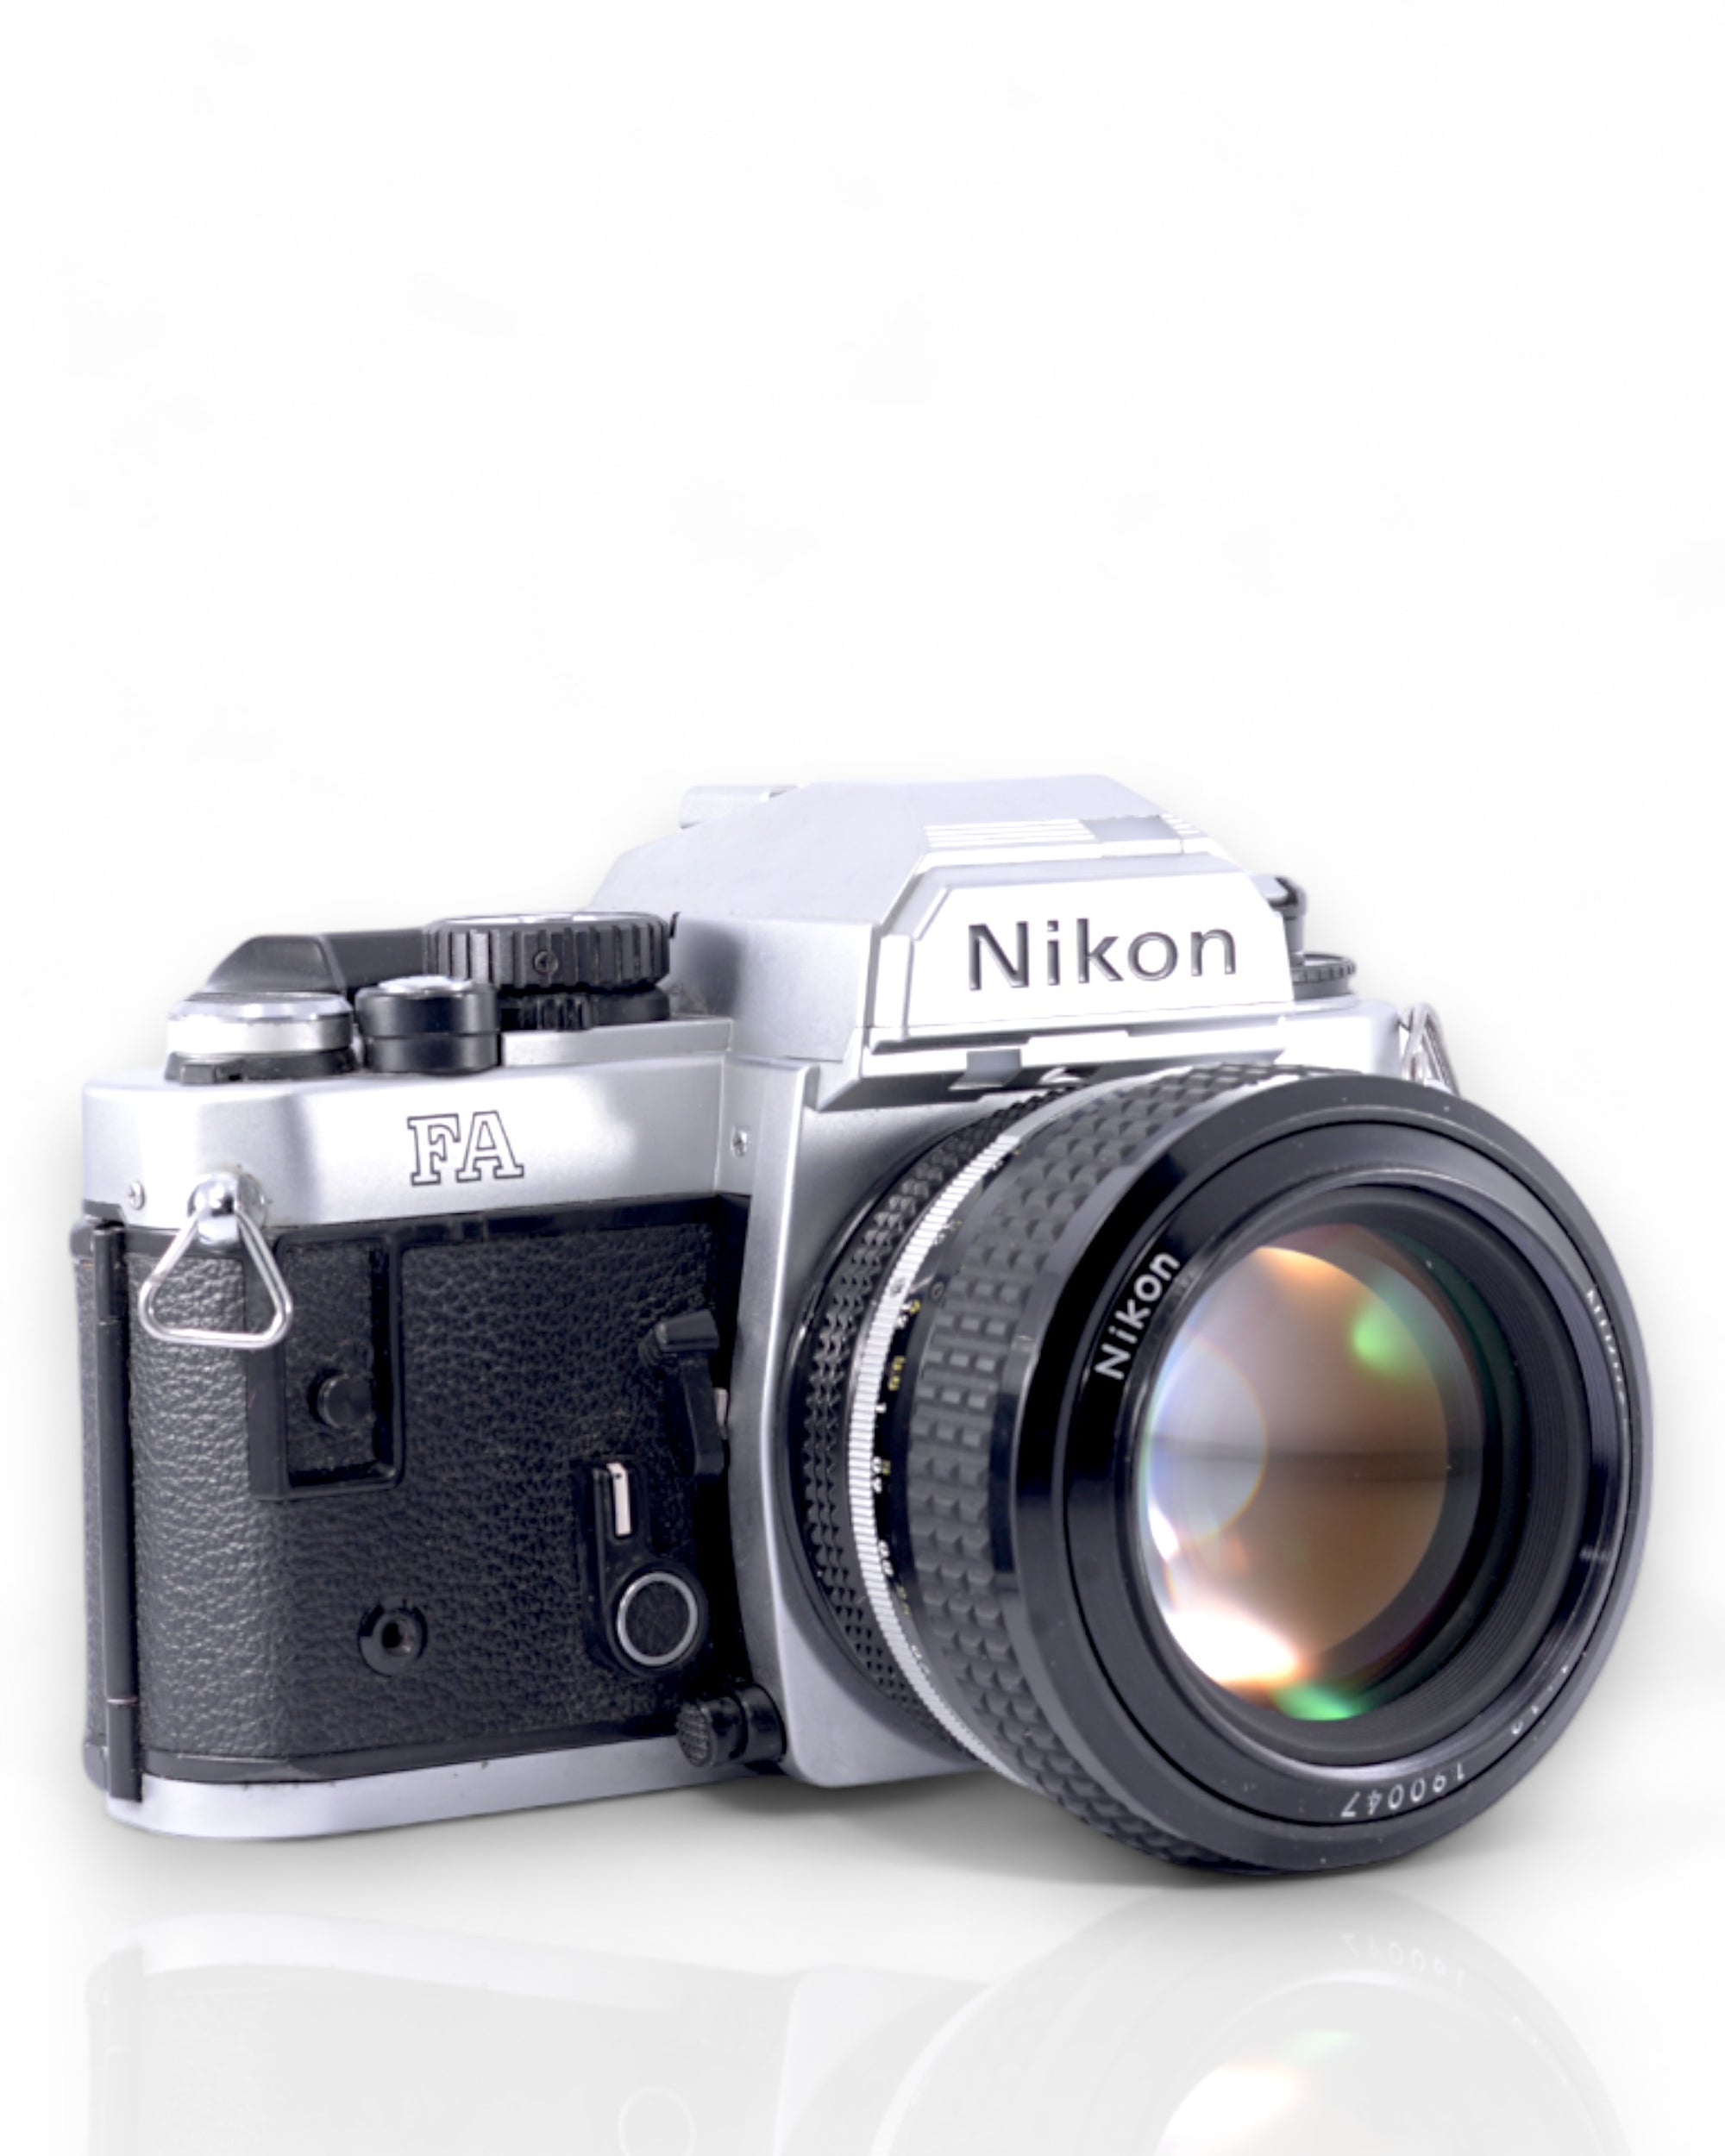 Nikon FA 35mm SLR Film Camera with motor drive and 50mm f1.2 Lens